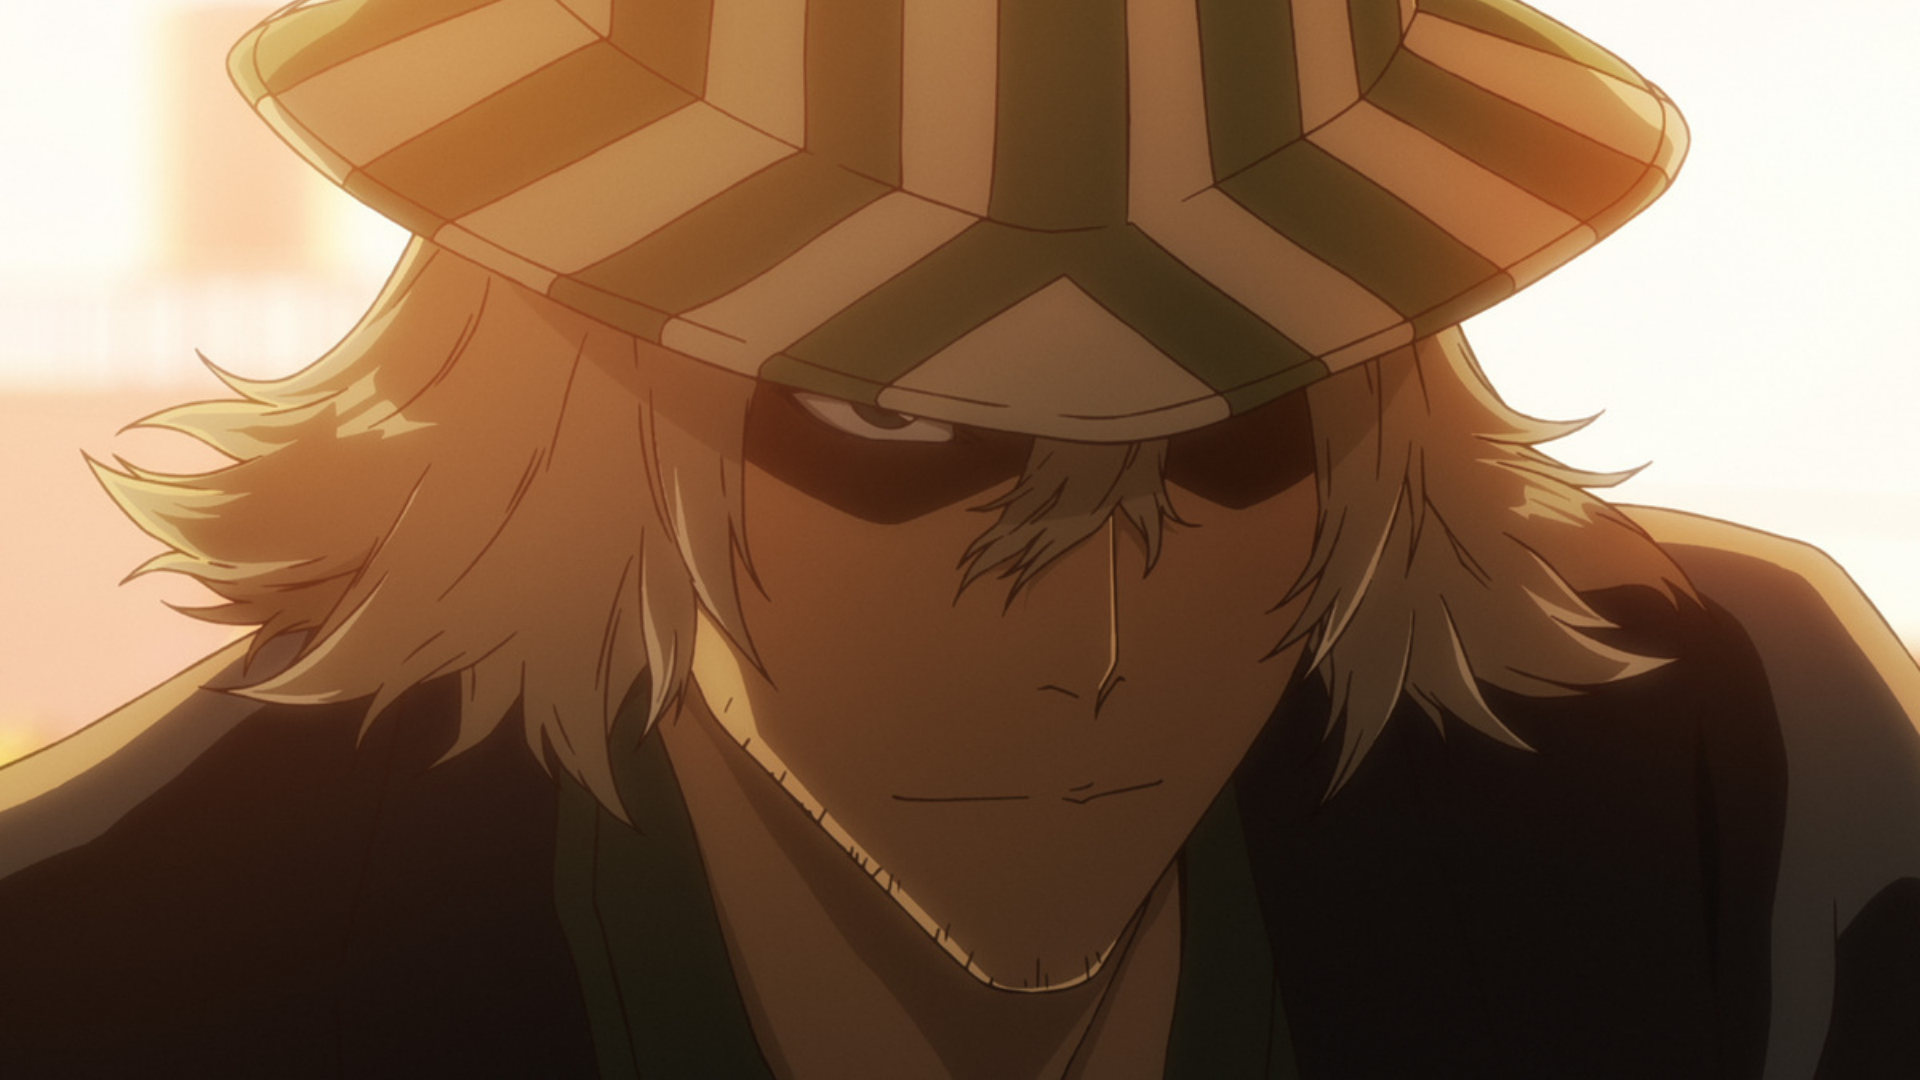 BLEACH: Thousand-Year Blood War Episode 2 Preview Released - Anime Corner